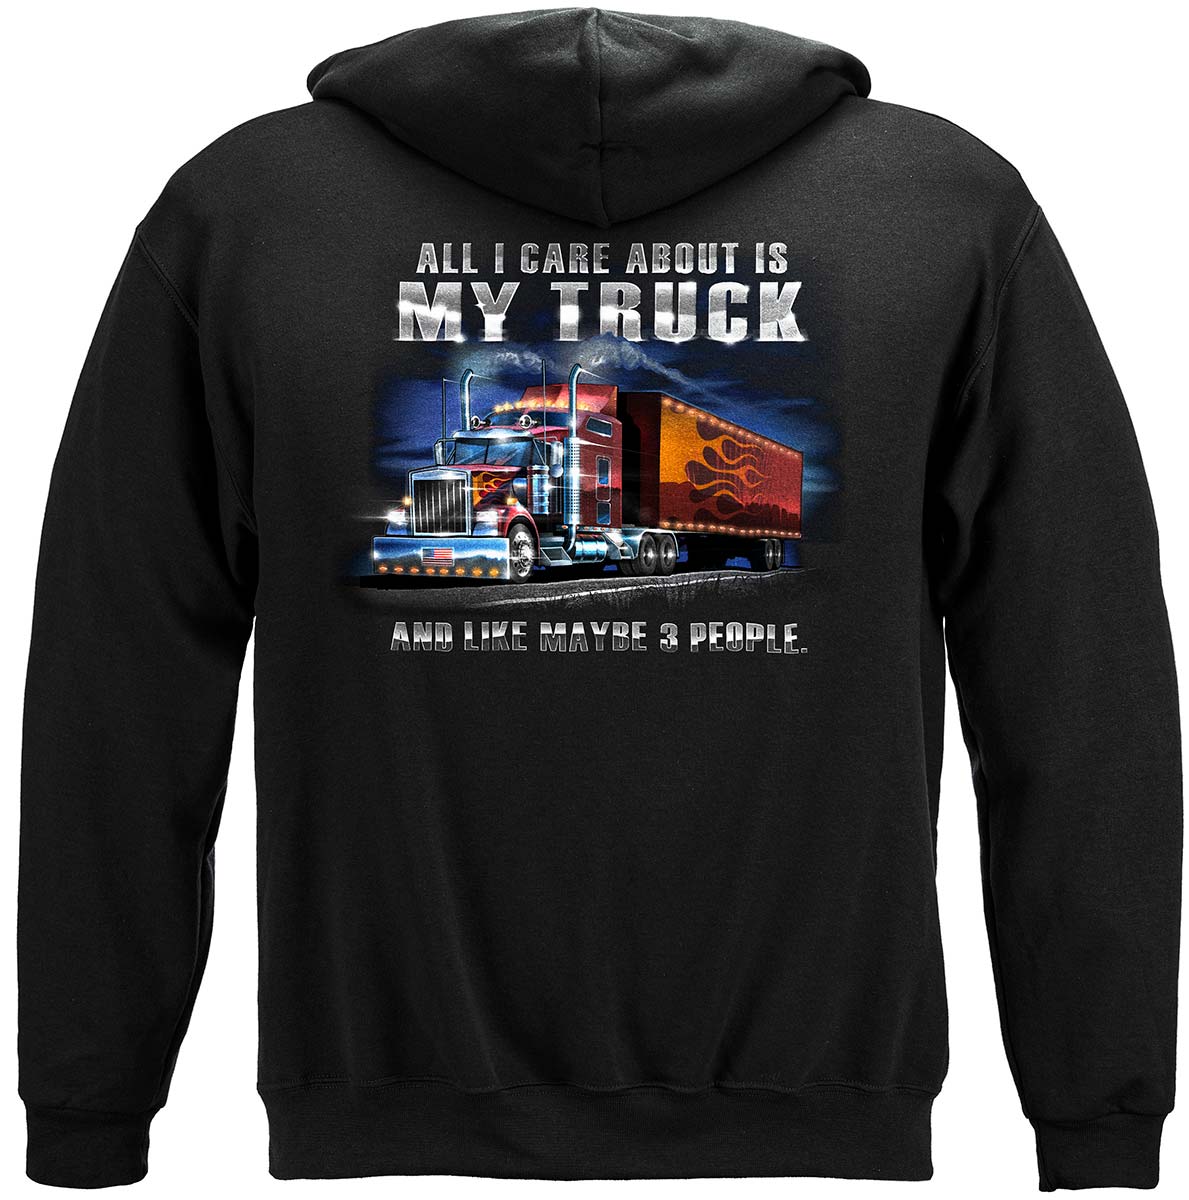 Trucker All I Care About Is My Truck Premium Long Sleeves